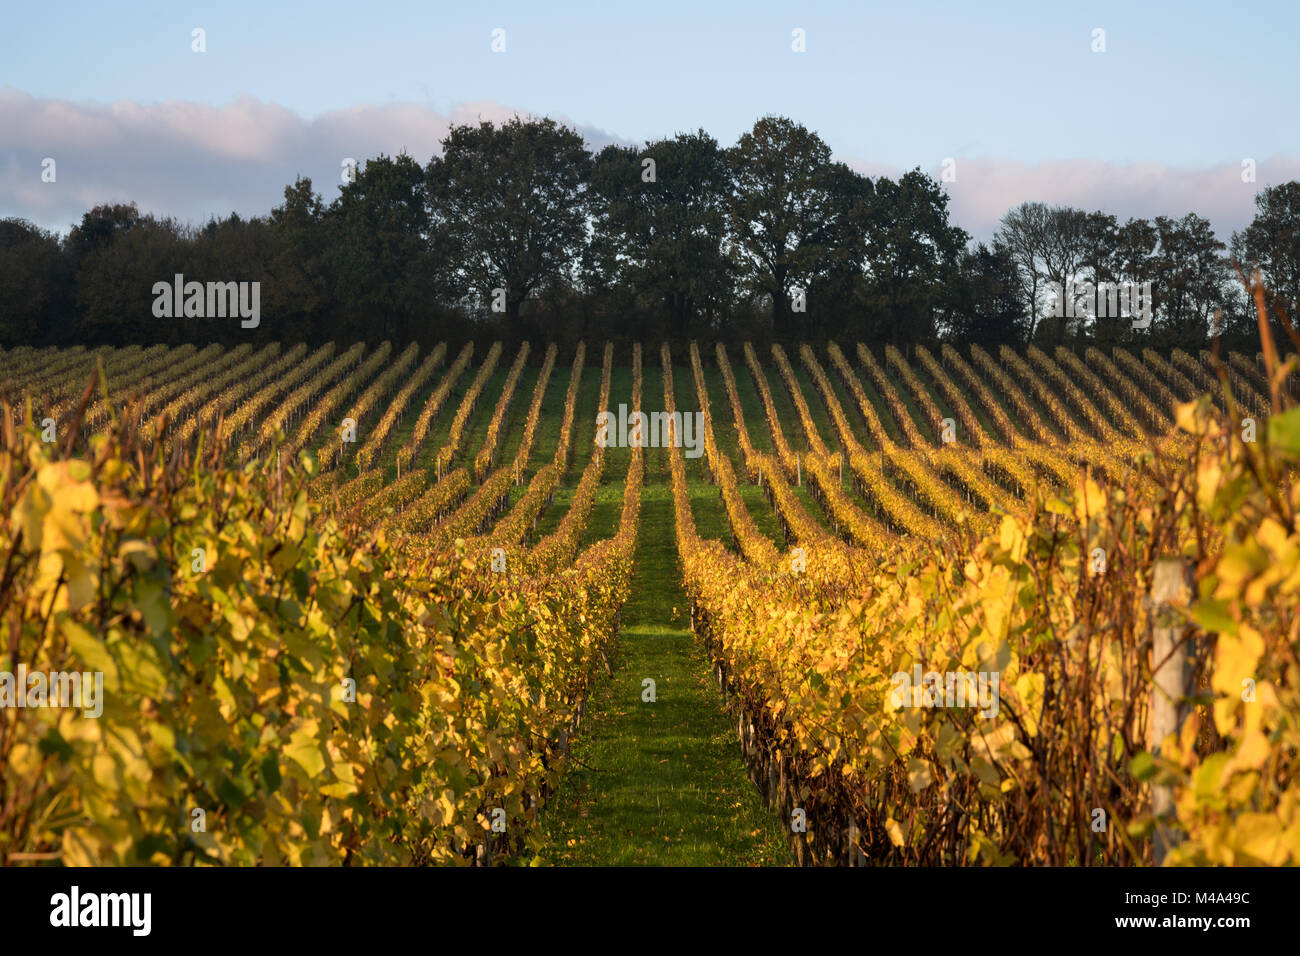 A Vineyard near Midhurst, Sussex, England with the vines catching the last of the Autumn afternoon sunlight. Stock Photo